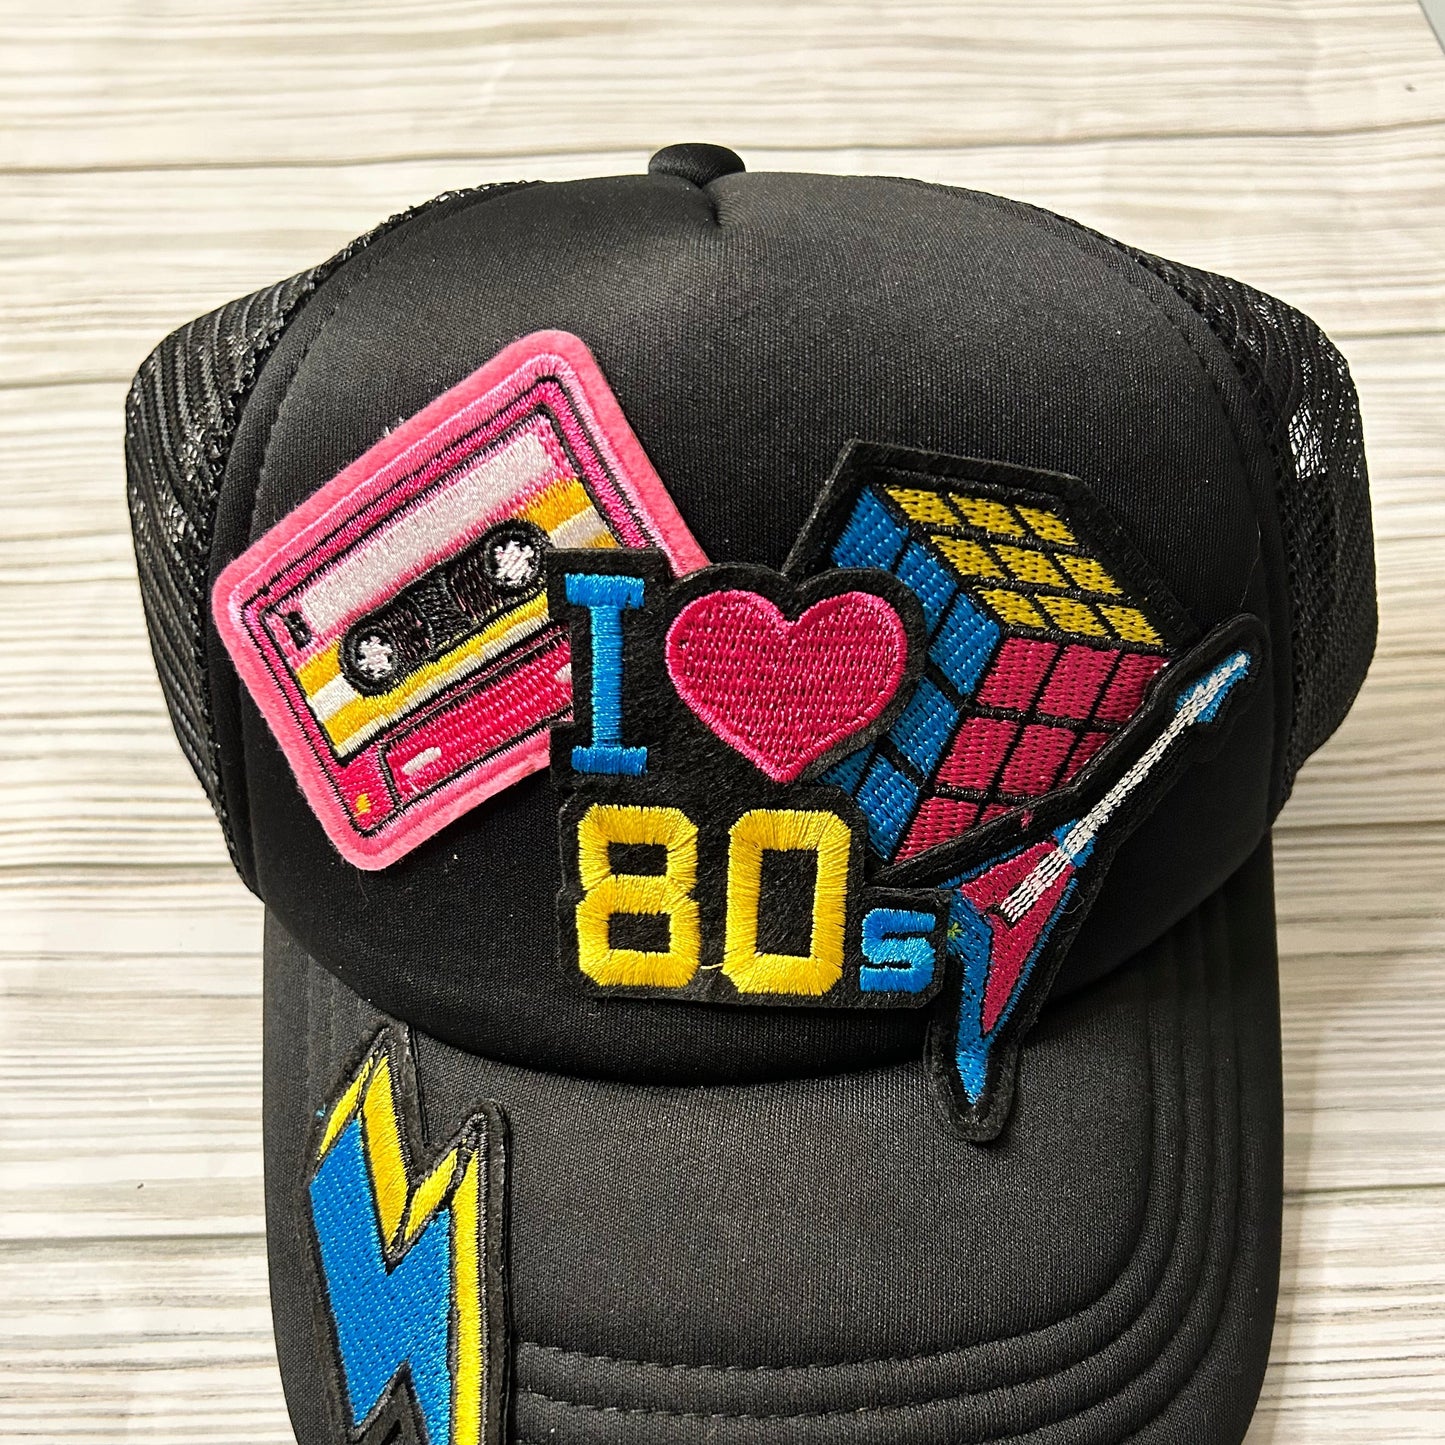 Black Trucker Hat with 80's Patches - Retro Style Snapback Cap